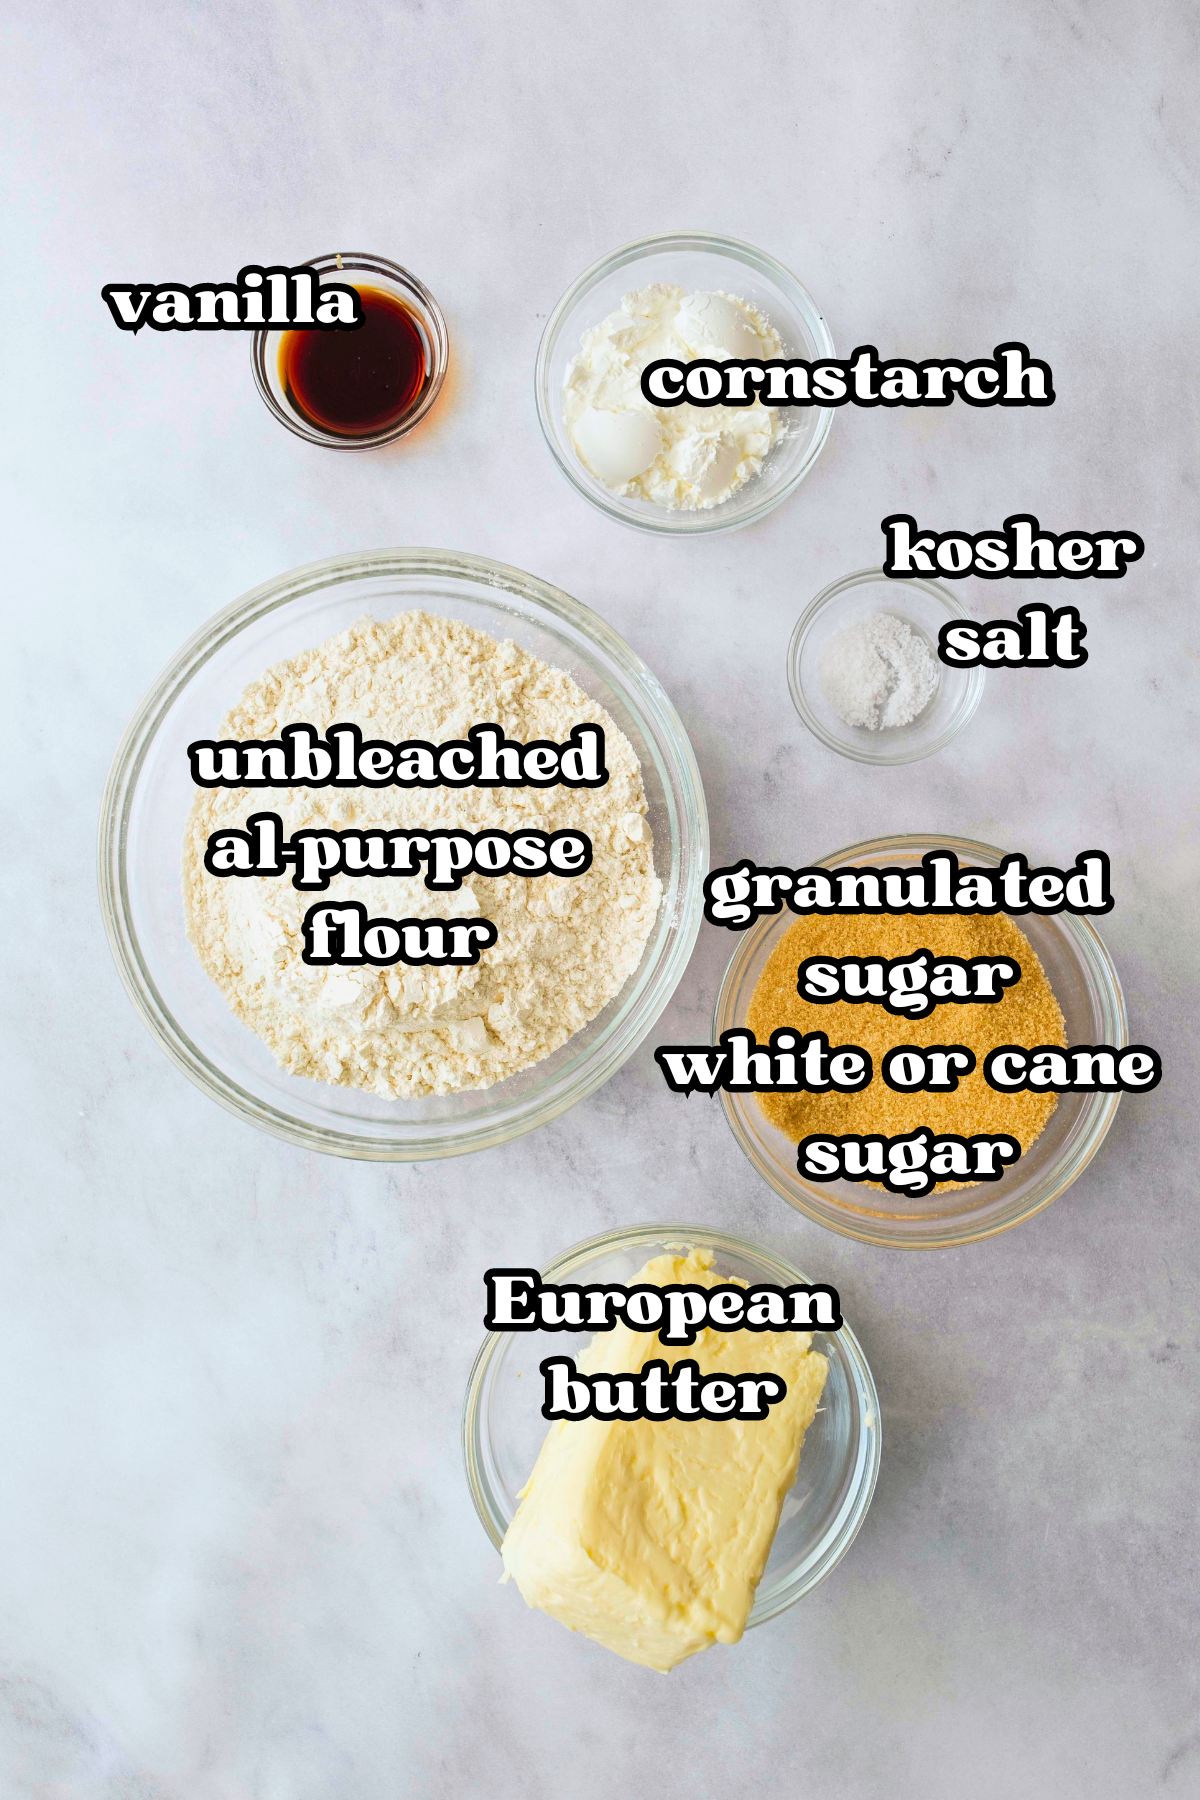 Labeled ingredients for Scottish shortbread.